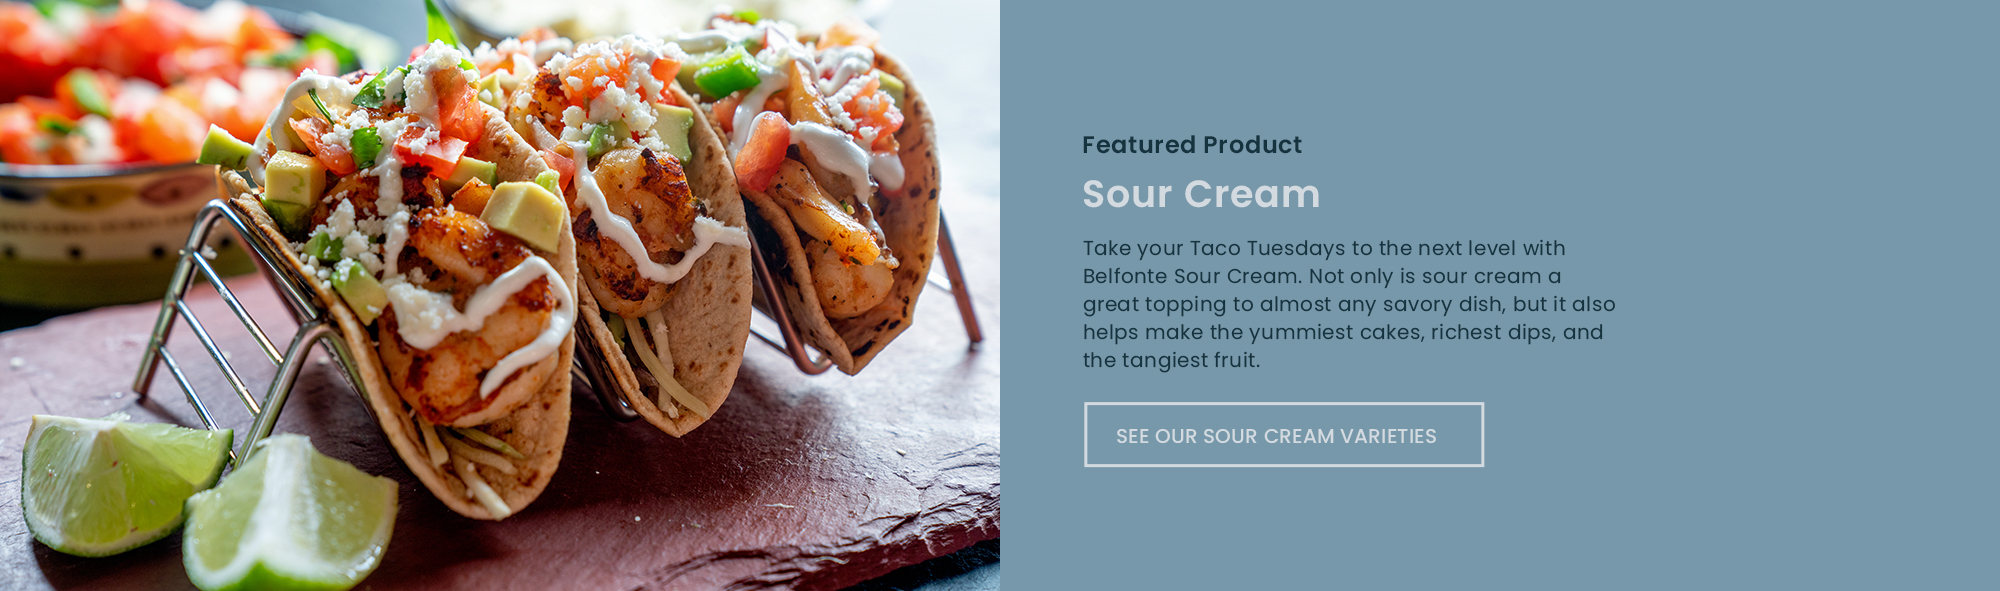 Take your Taco Tuesdays to the next level with Belfonte Sour Cream. Not only is sour cream a great topping to almost any savory dish, but it also helps make the yummiest cakes, richest dips, and the tangiest fruit.